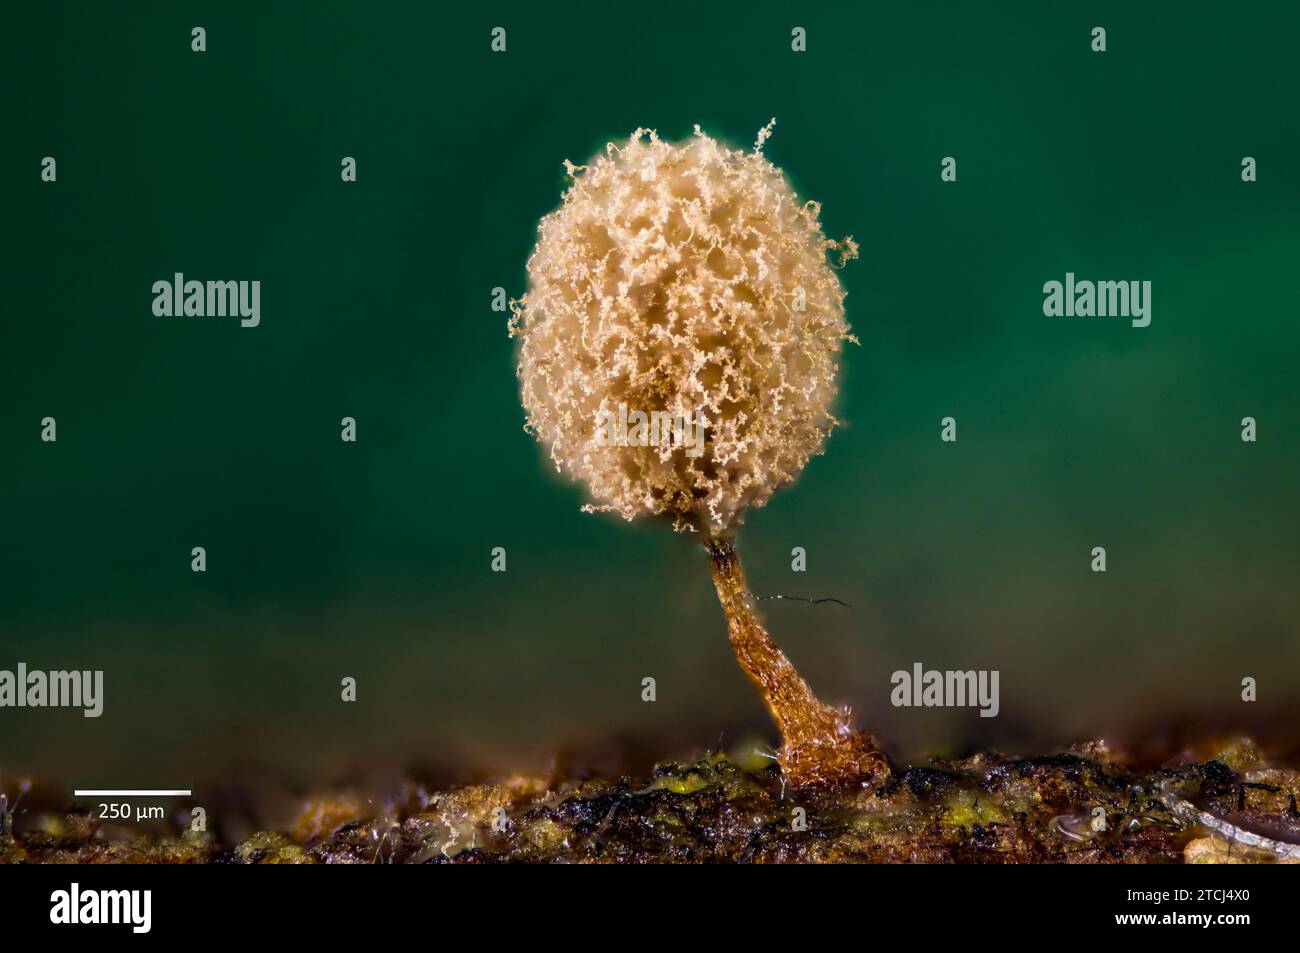 Sporangia of the slime mold Trichia sp. Growing from wood of Acer sp. collected from Hidra, south-western Norway. Stock Photo